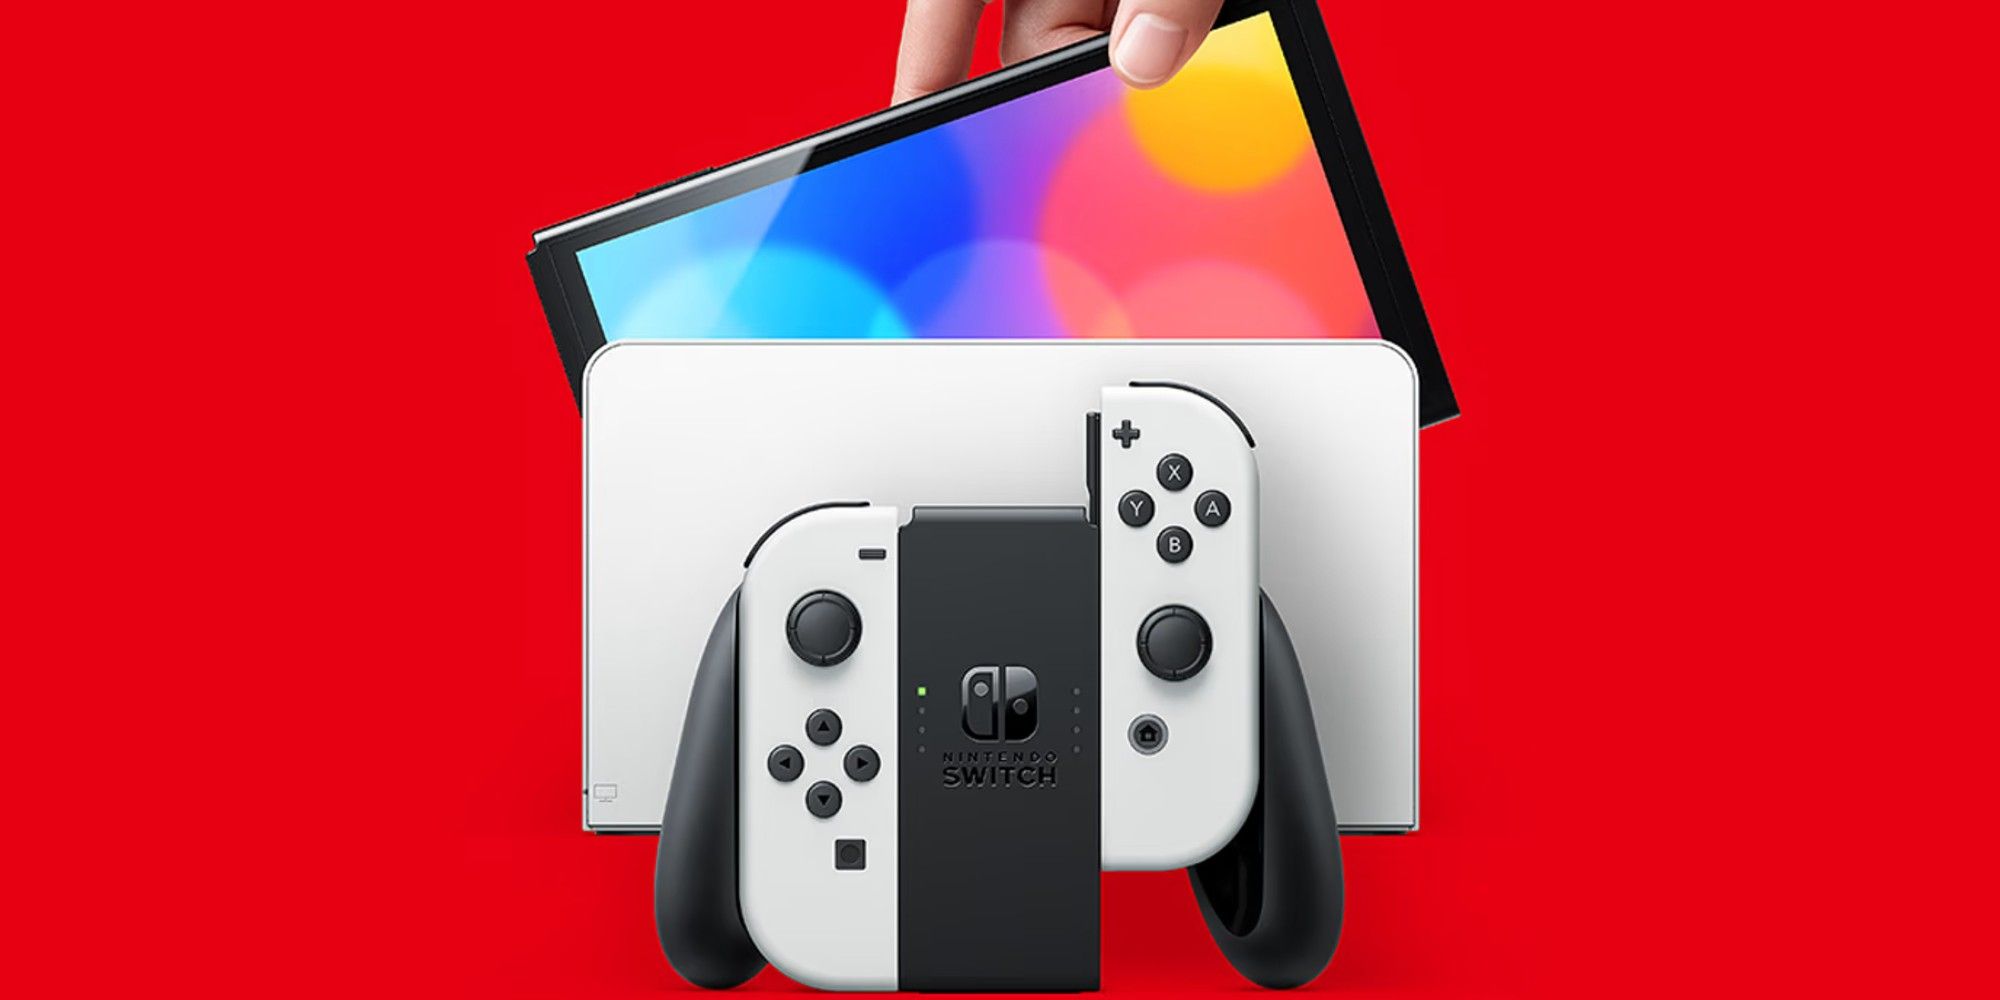 Nintendo Switch price isn't going up, despite higher costs: president -  Nikkei Asia